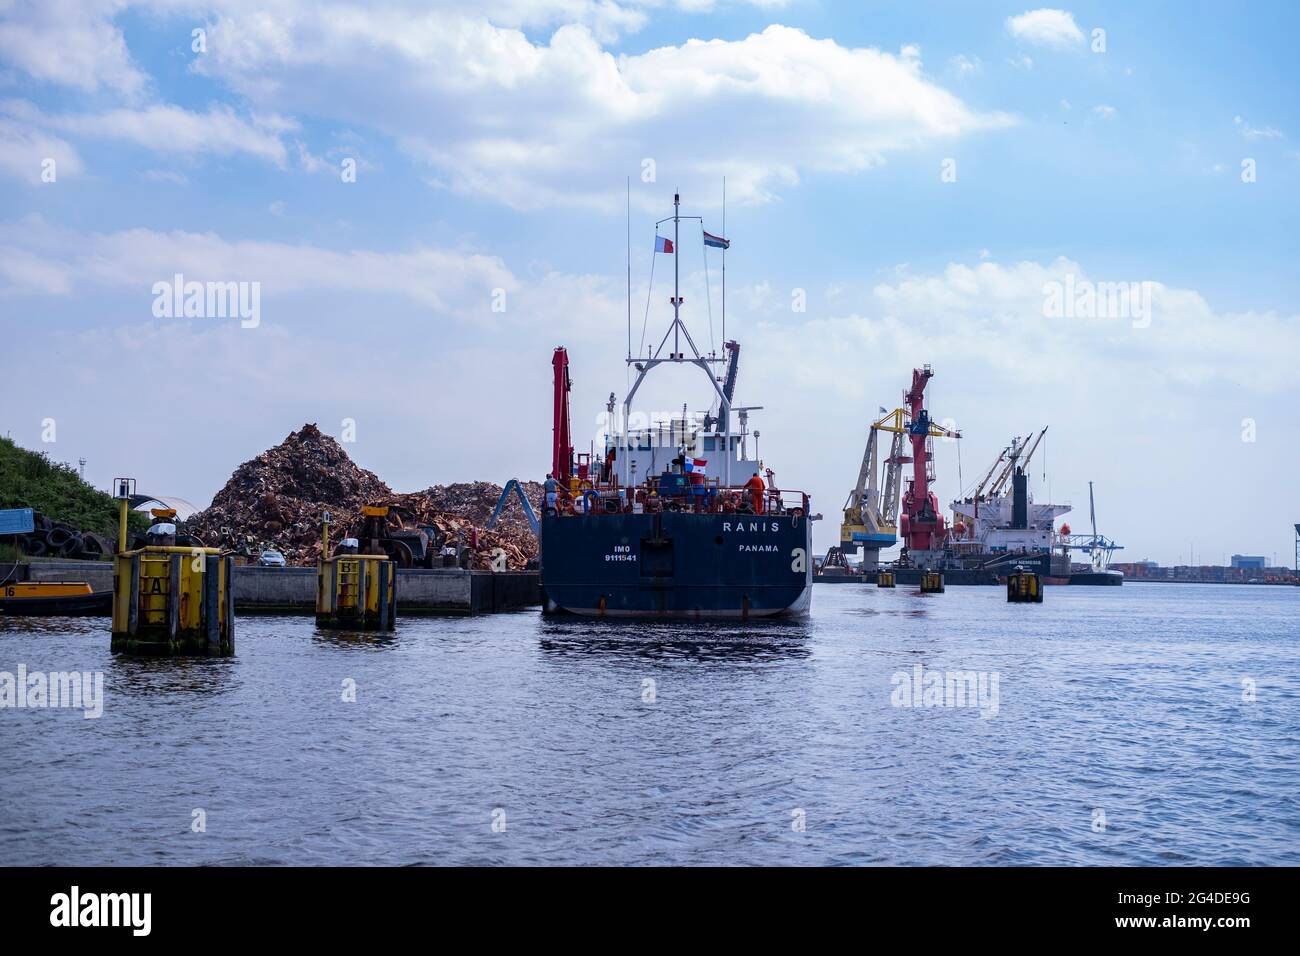 global logistics in the harbours of Amsterdam Stock Photo